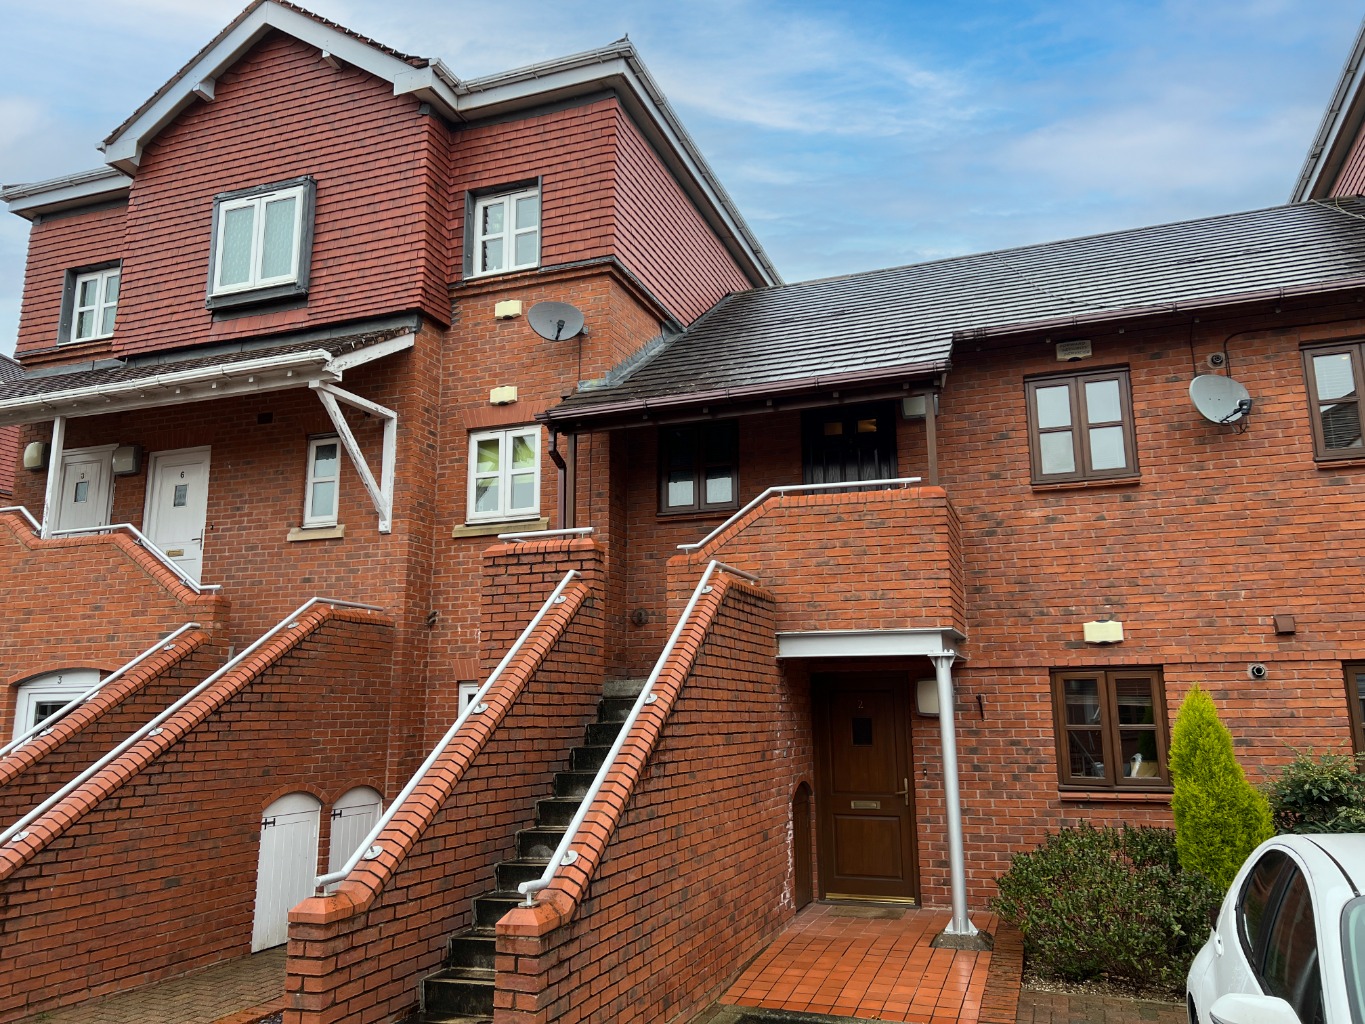 2 bed flat for sale in Old Hall Gardens, Solihull - Property Image 1